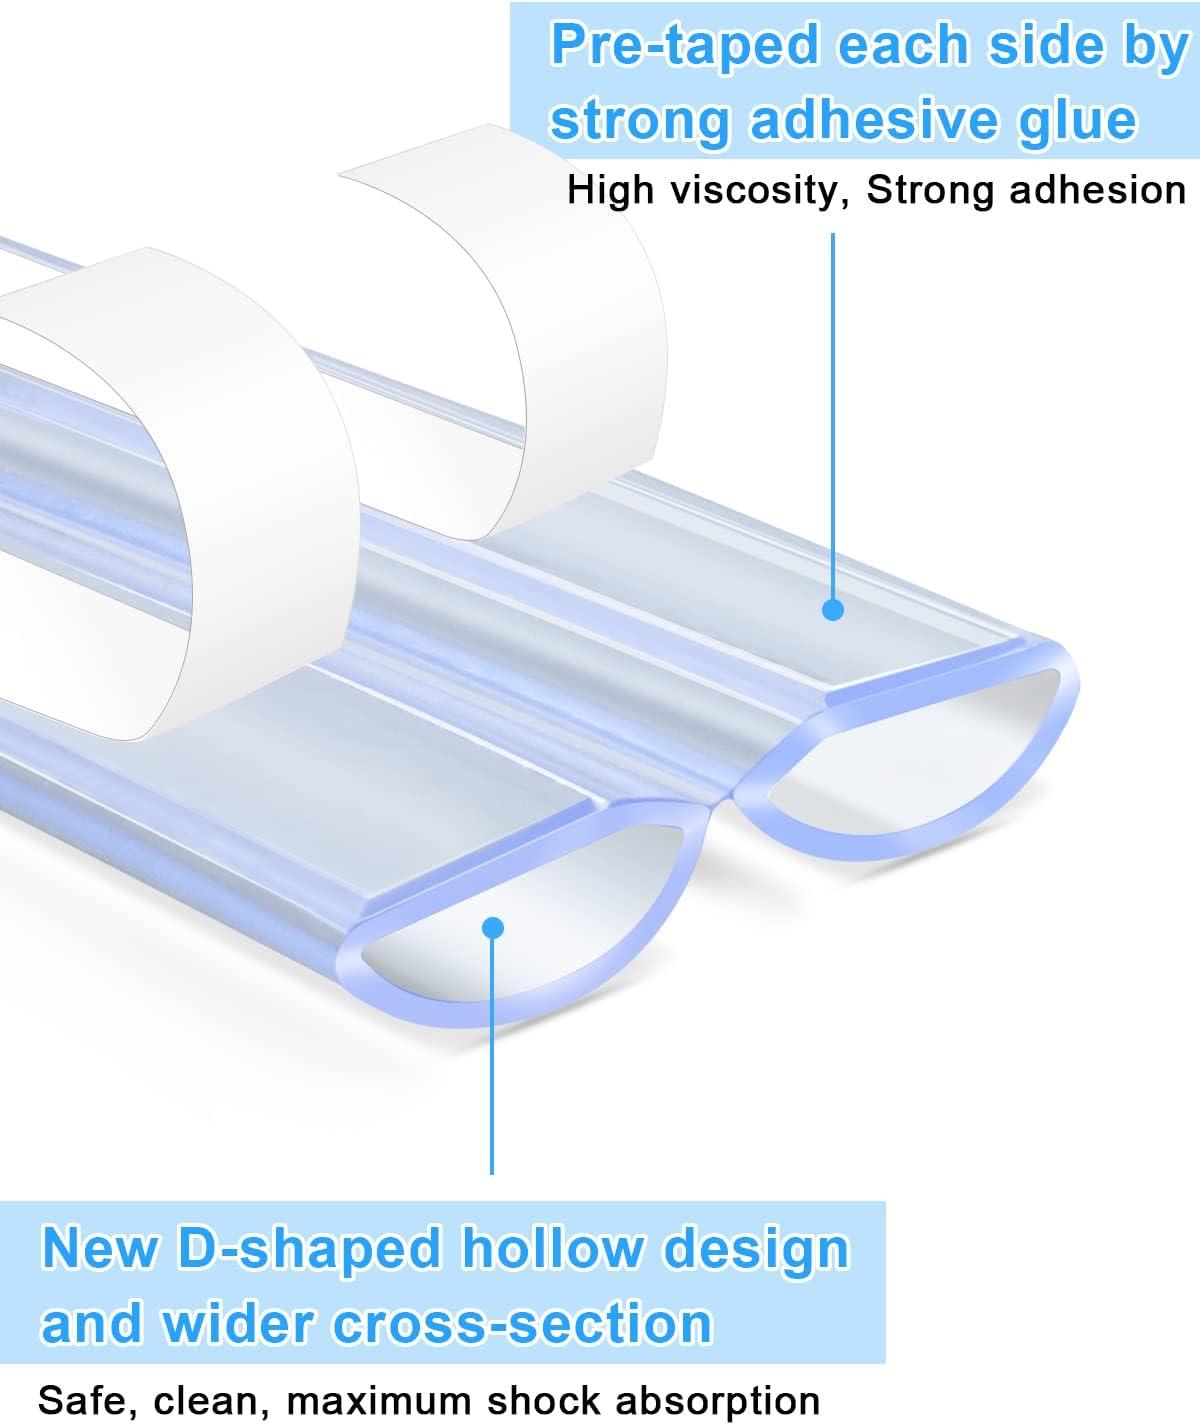 Baby Proofing, Clear Edge Protector Strip, Silicone Soft Corner